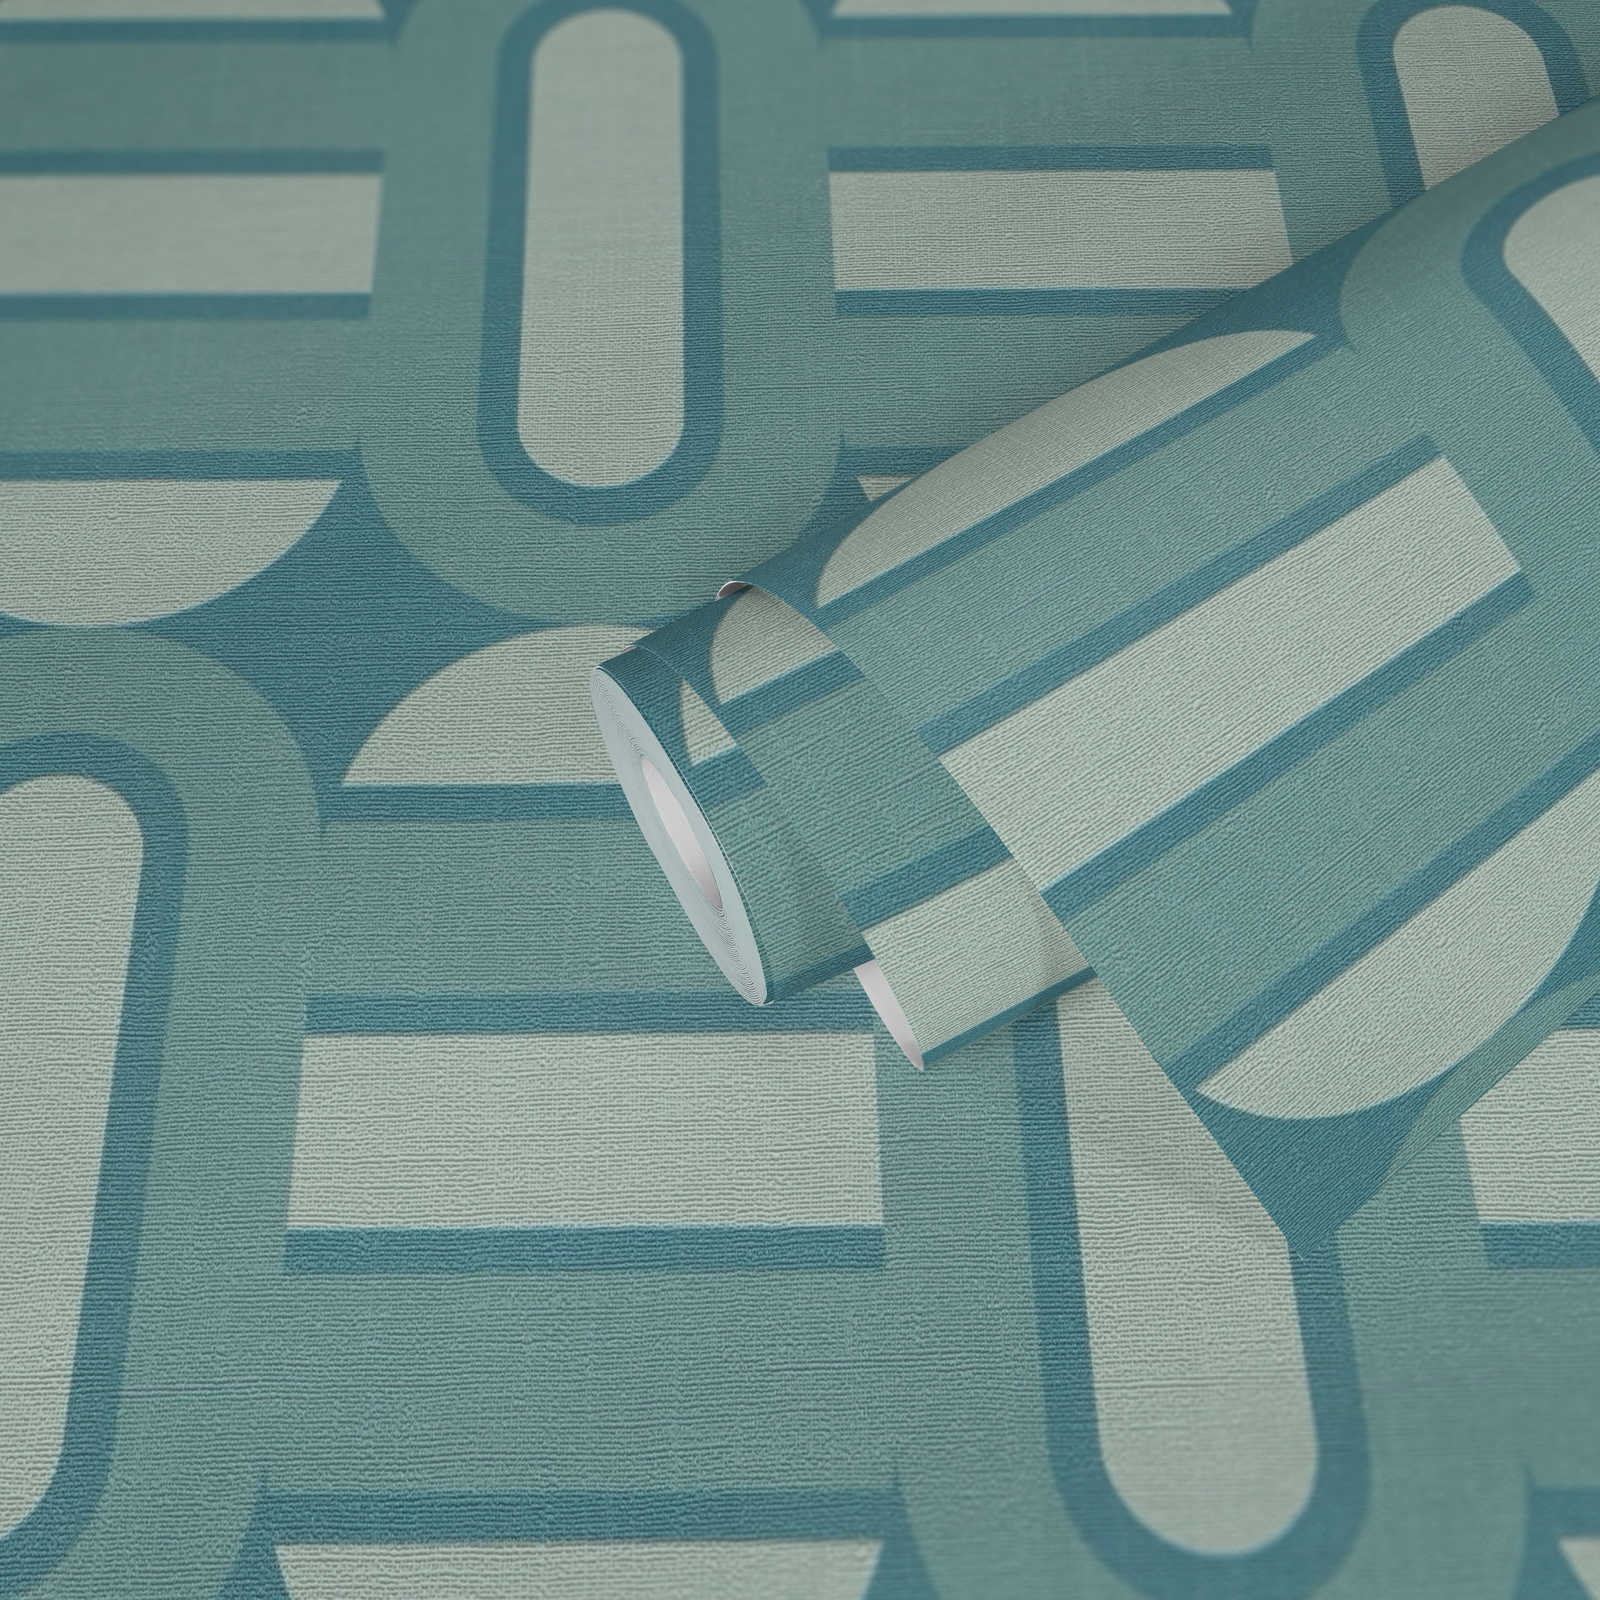             Lightly textured wallpaper with ovals and bars in retro style - turquoise, blue, light blue
        